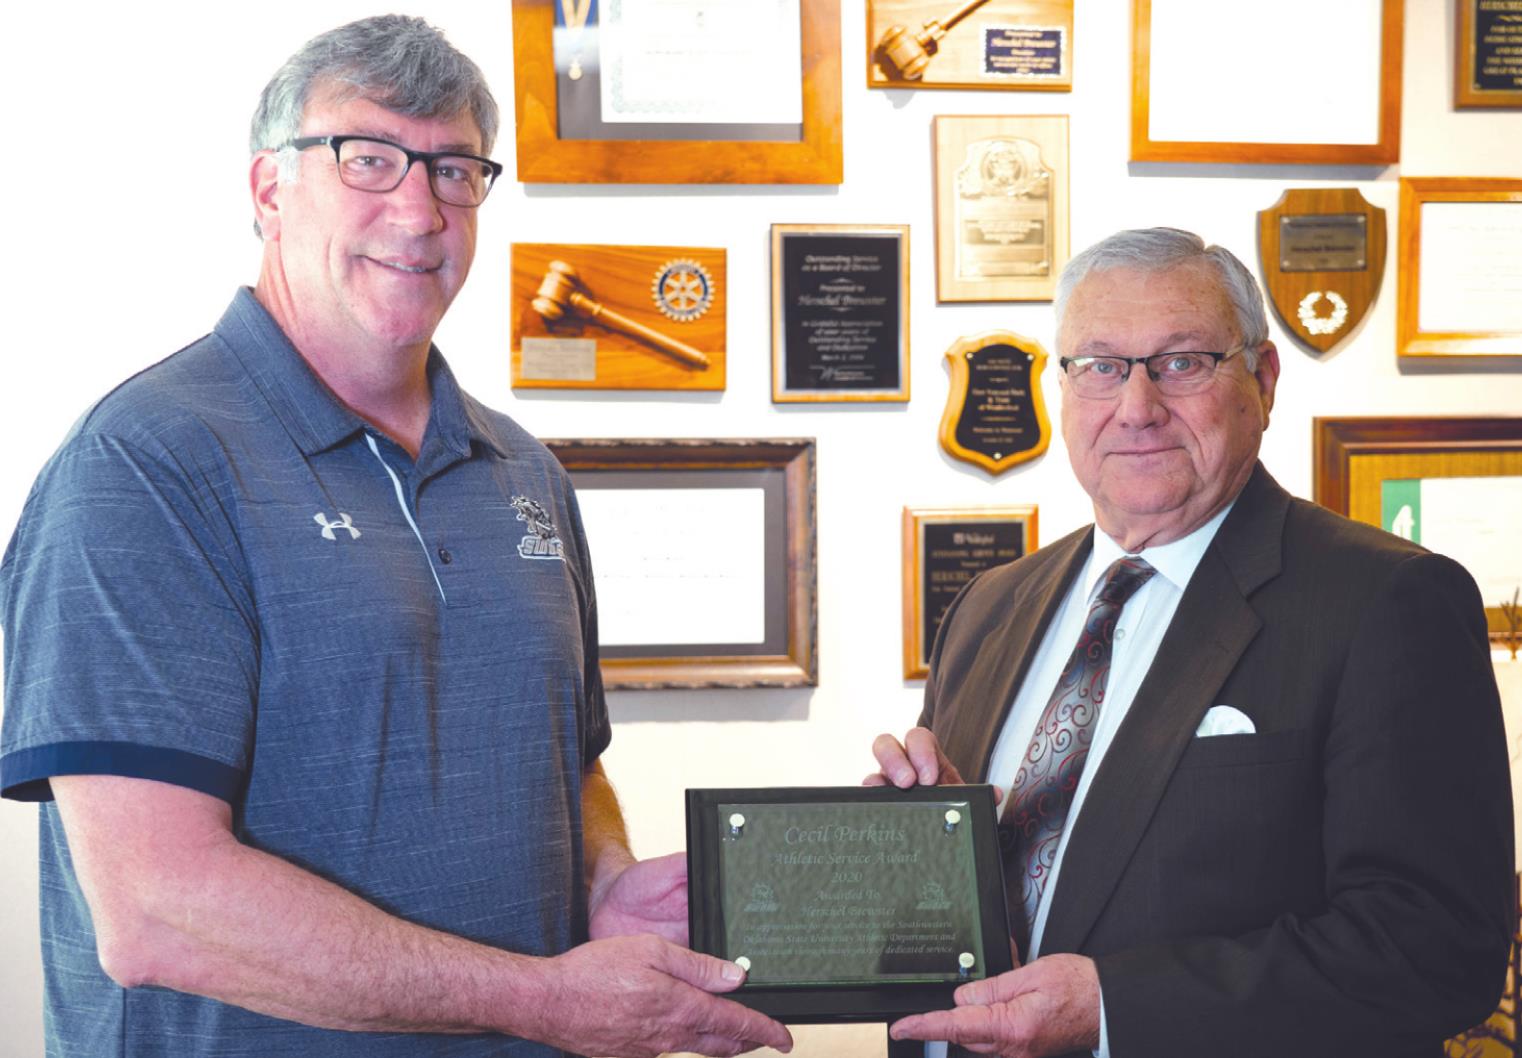 SWOSU Athletic Director Todd Thurman, left, present the Cecil Perkins Service Award to First National Bank and Trust Co. President and CEO Herschel Brewster. Provided